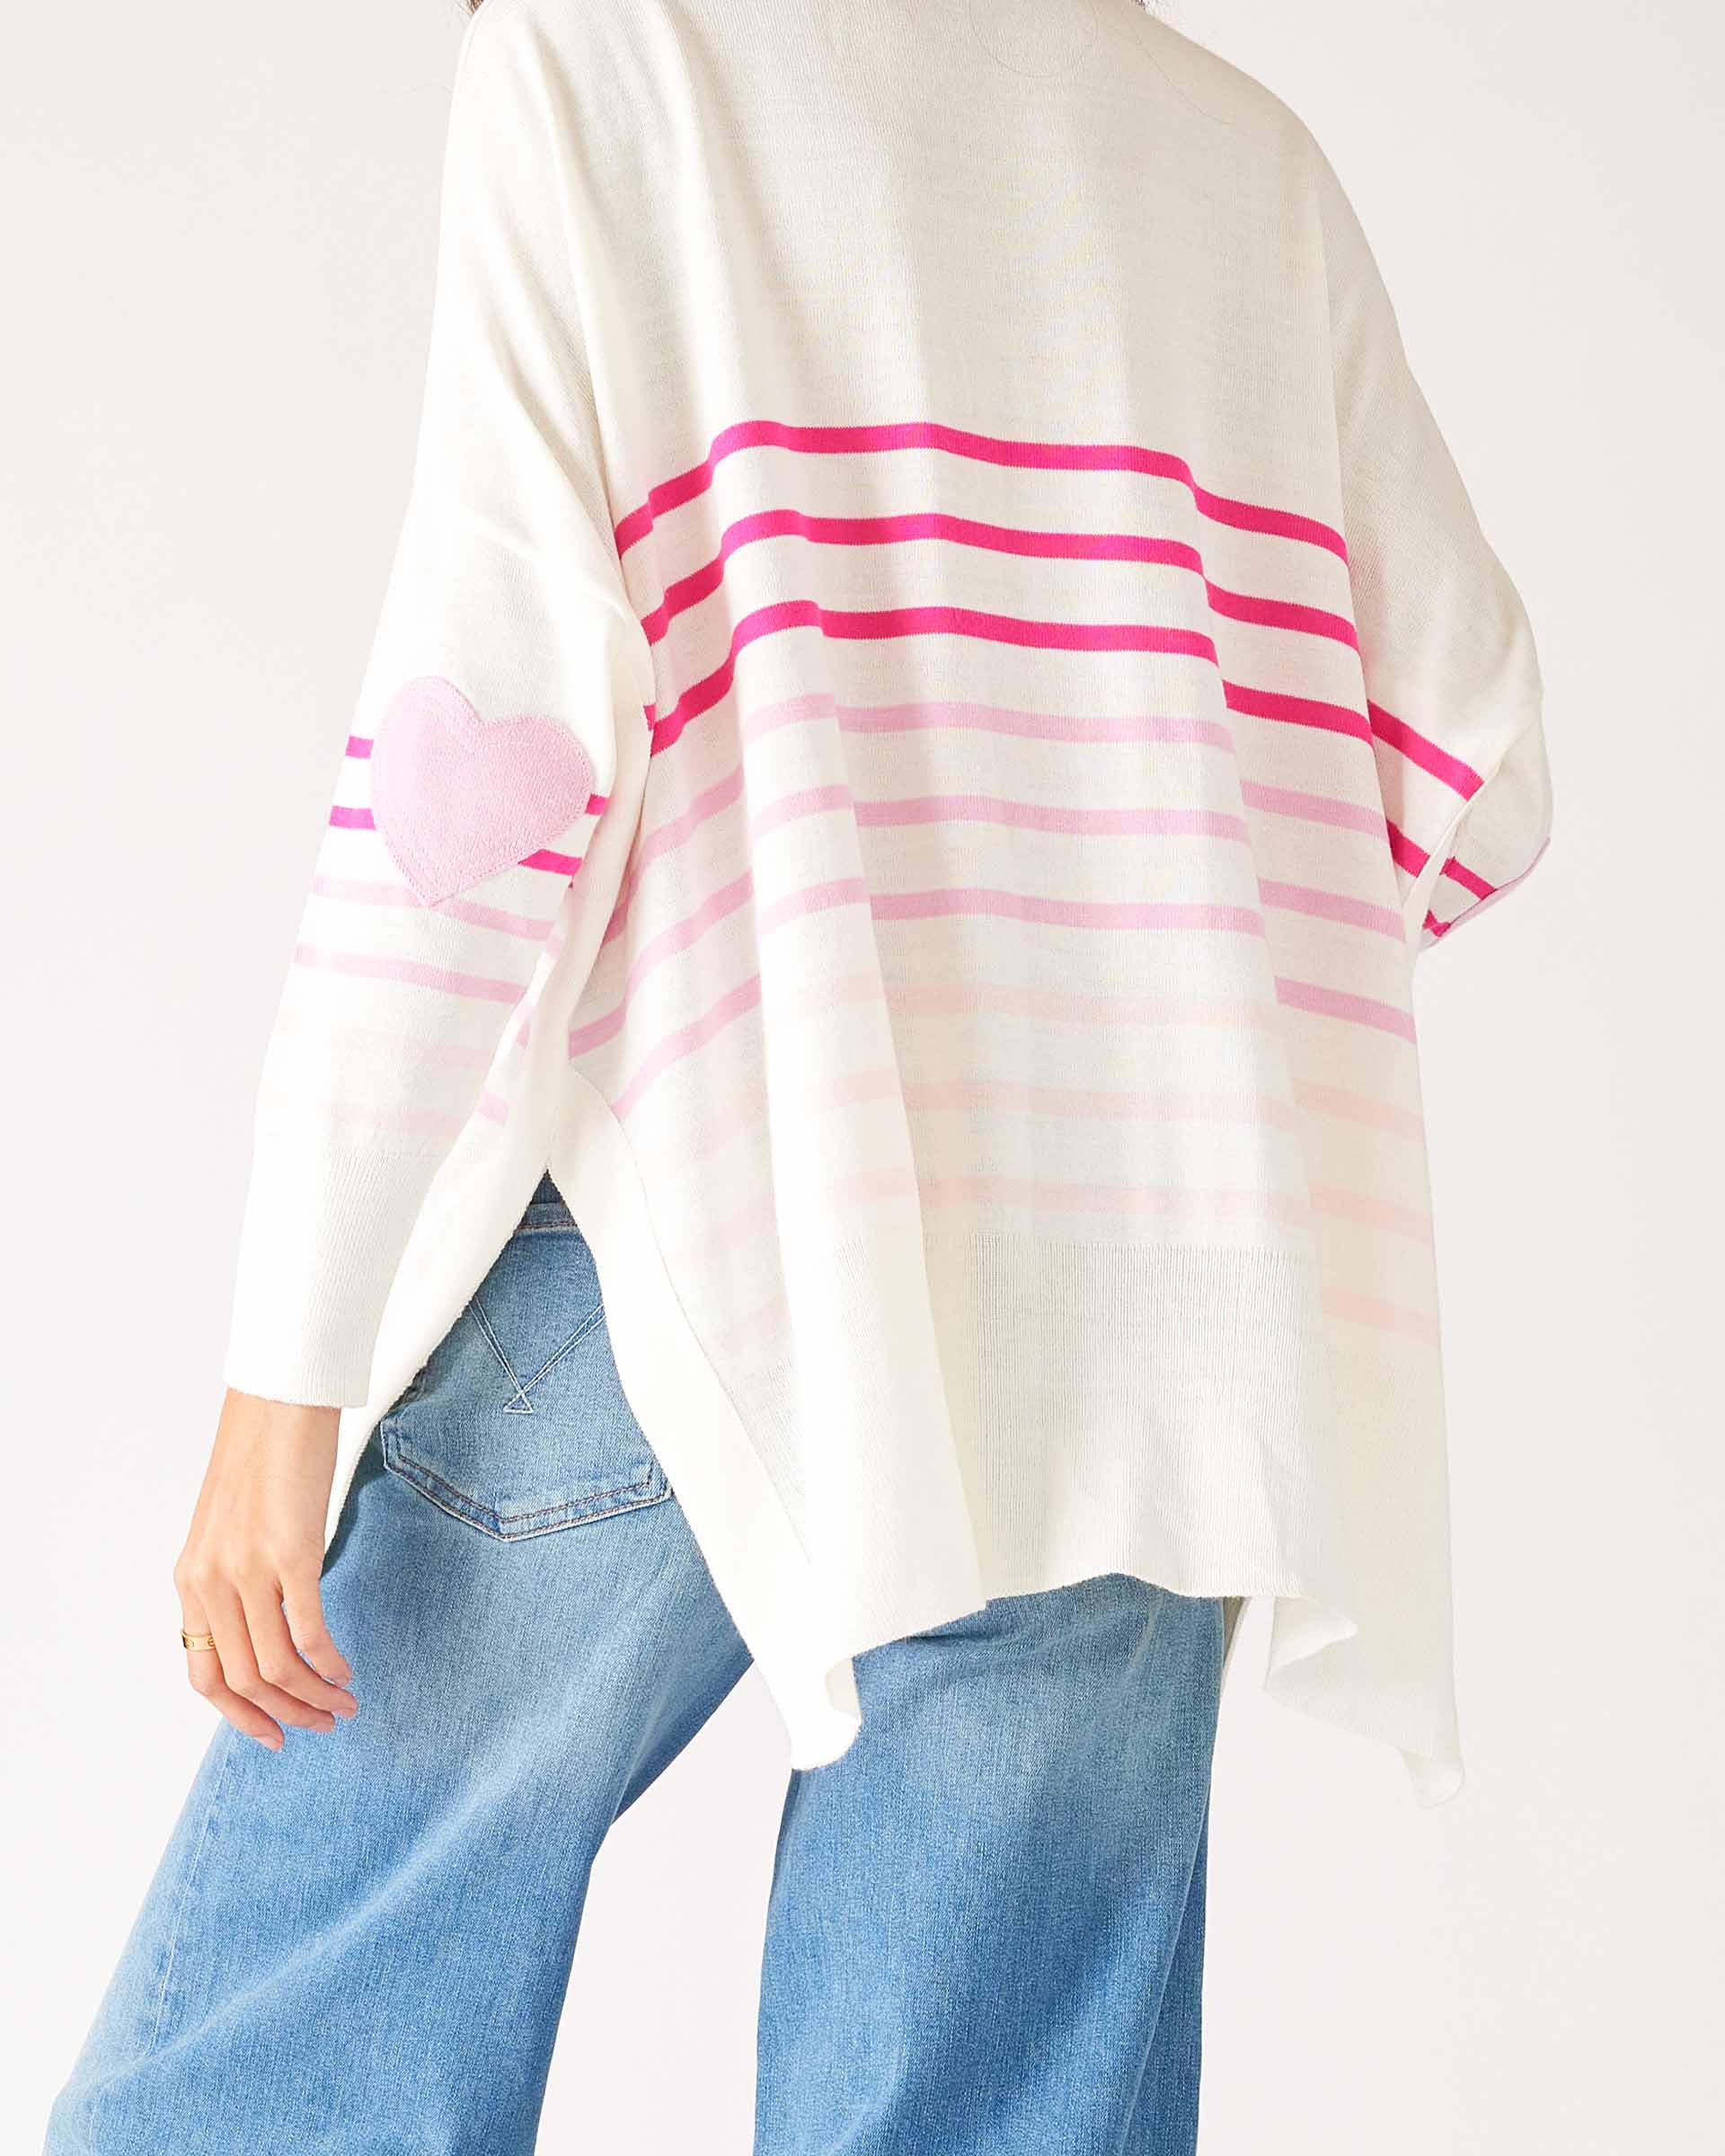 Women's One Size Pink Striped Sweater with Pink Hearts on Sleeve Back View